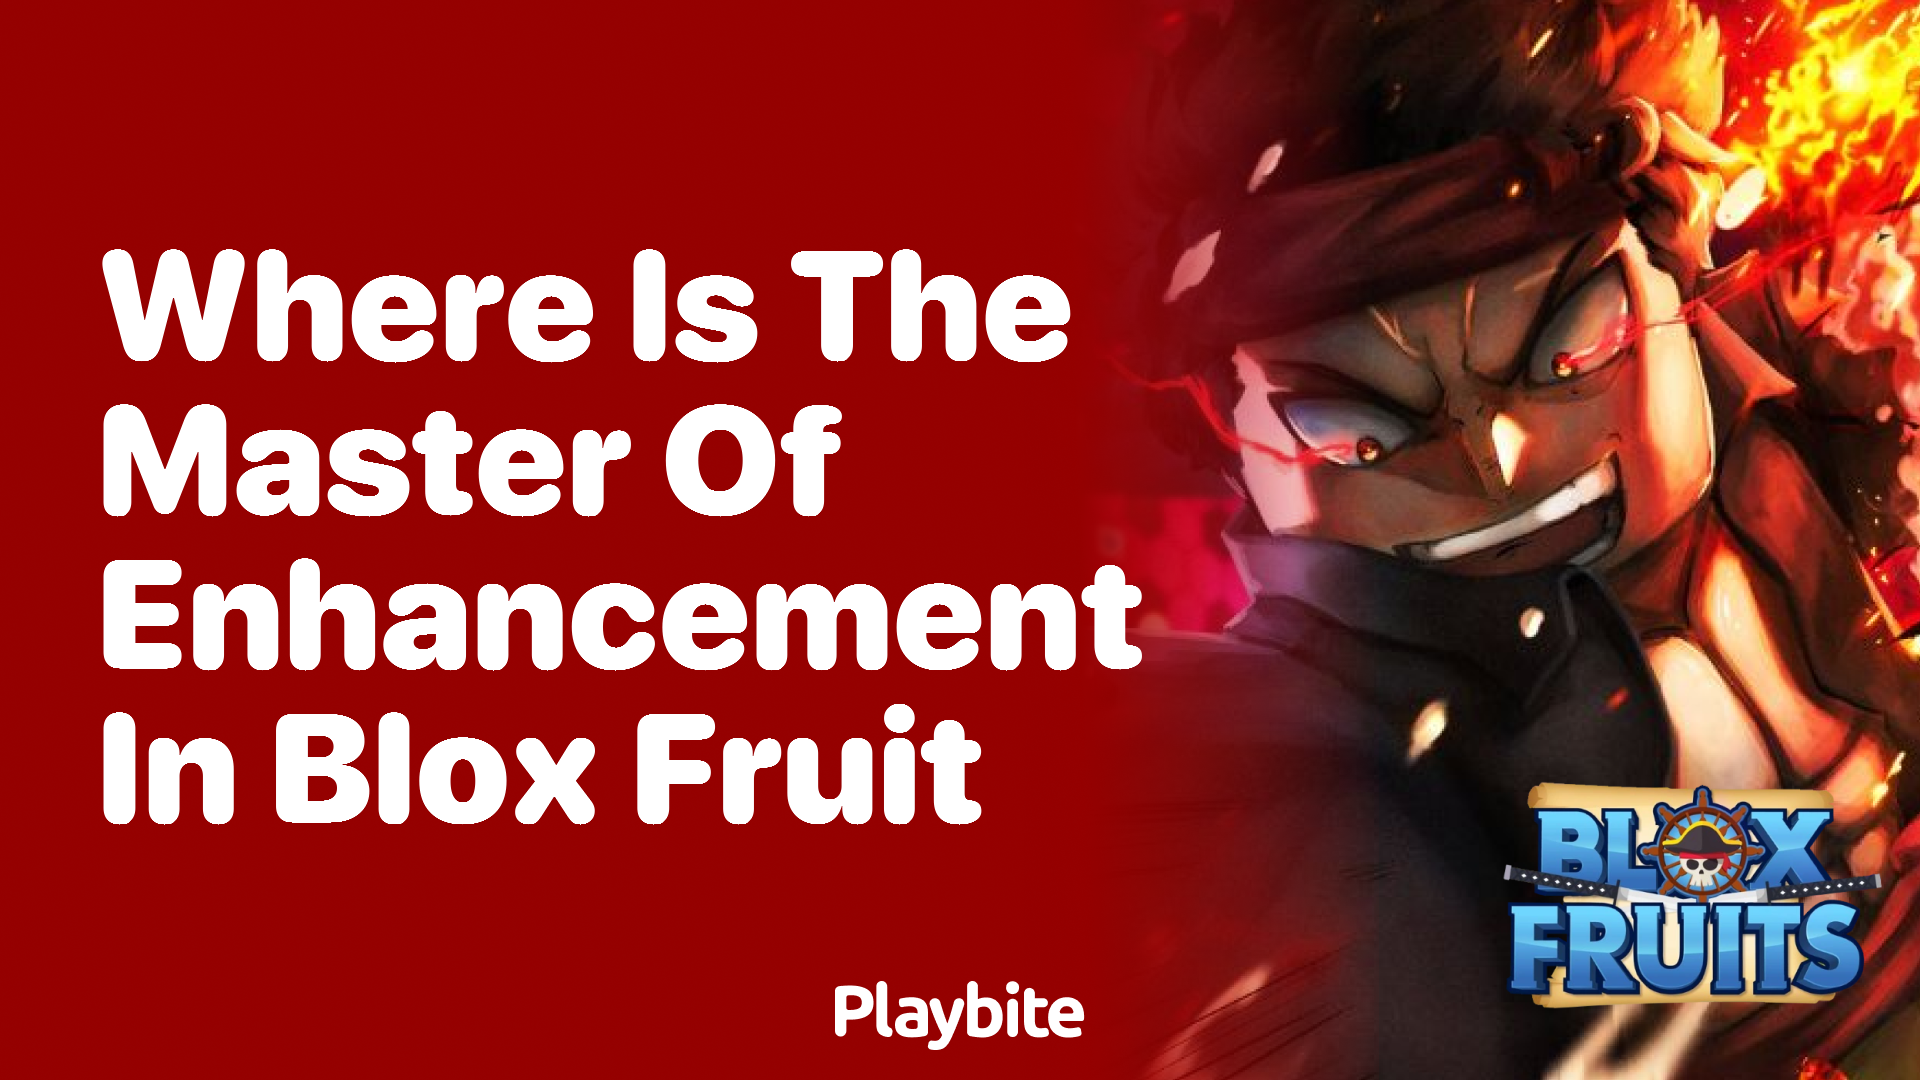 Where Is the Master of Enhancement in Blox Fruit?